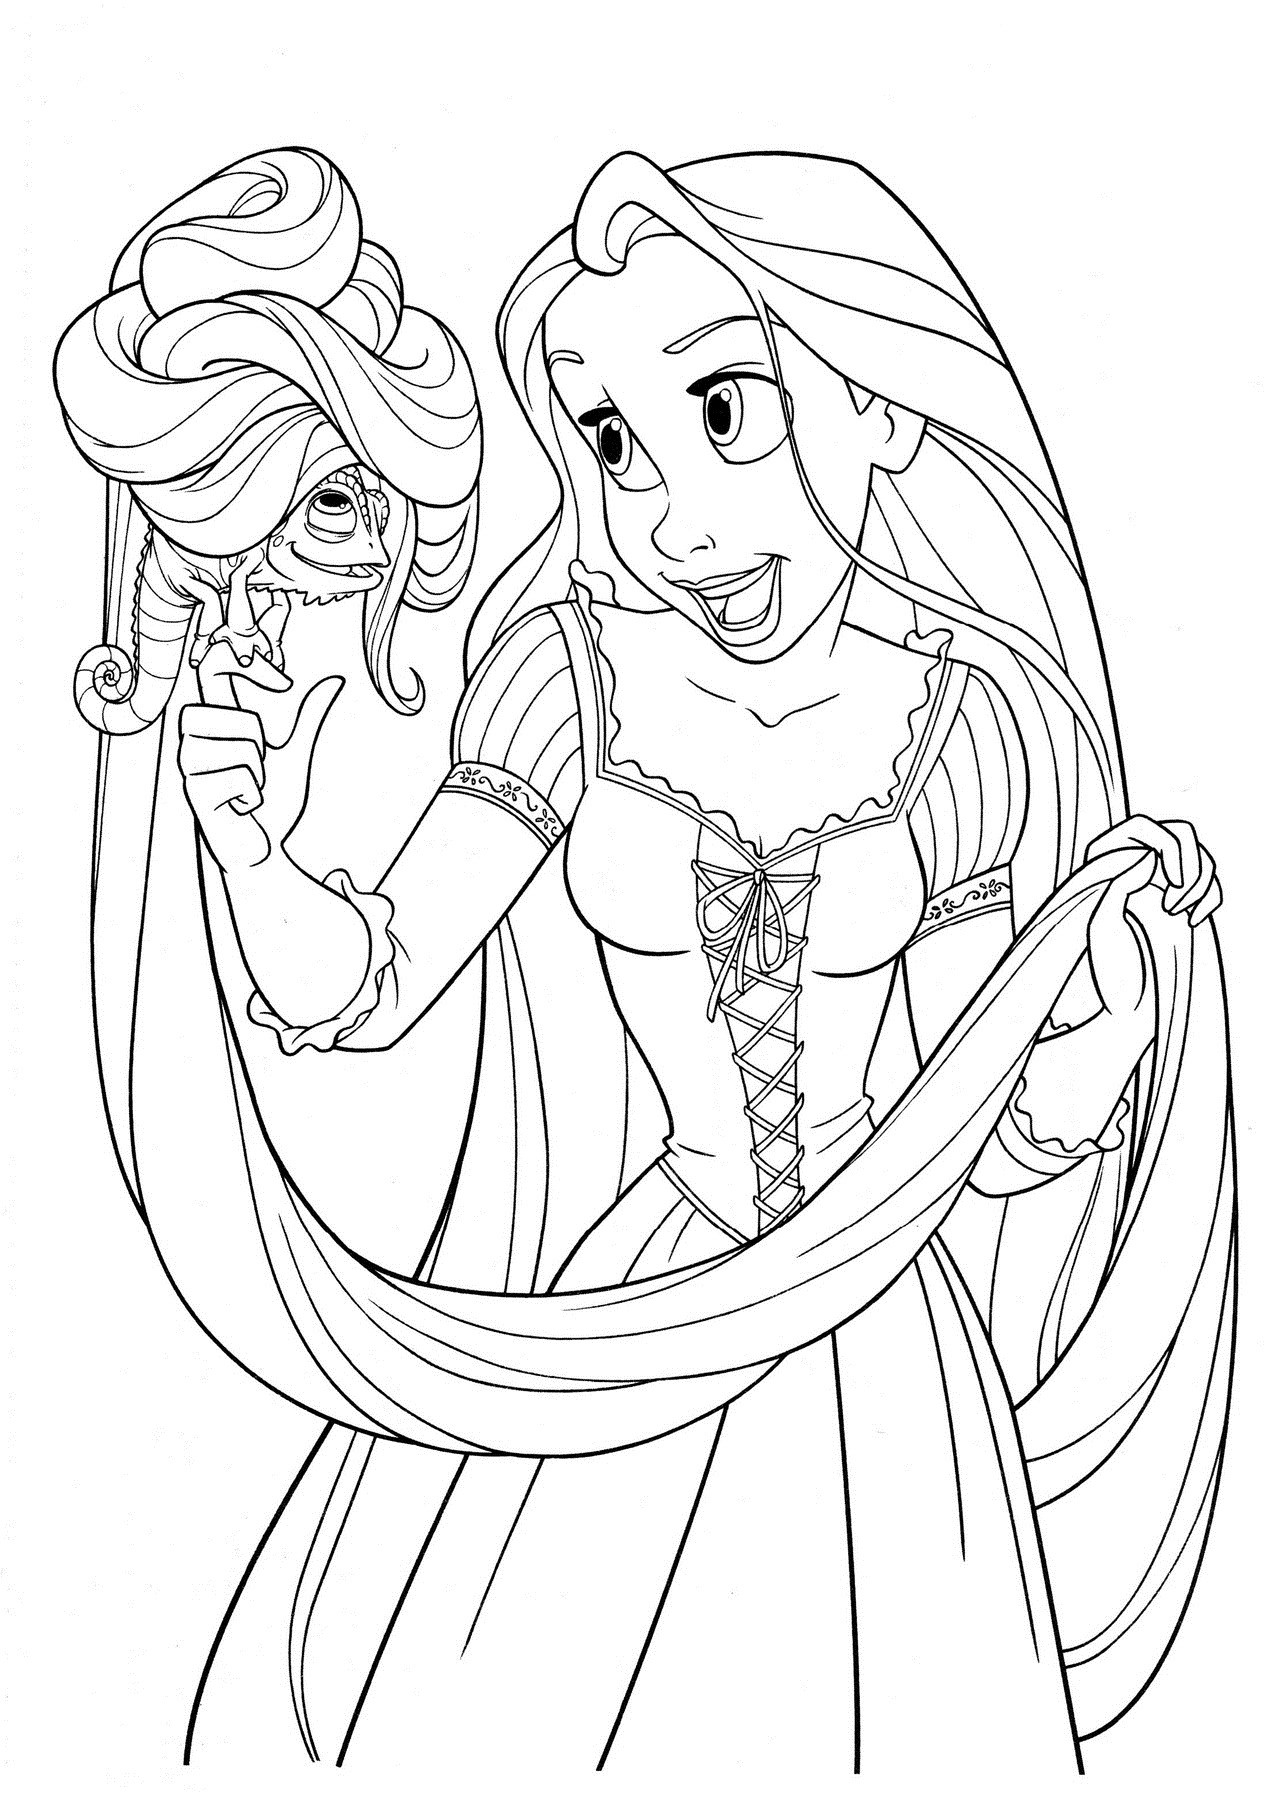 Coloring Pages For Toddlers To Print
 Free Printable Tangled Coloring Pages For Kids